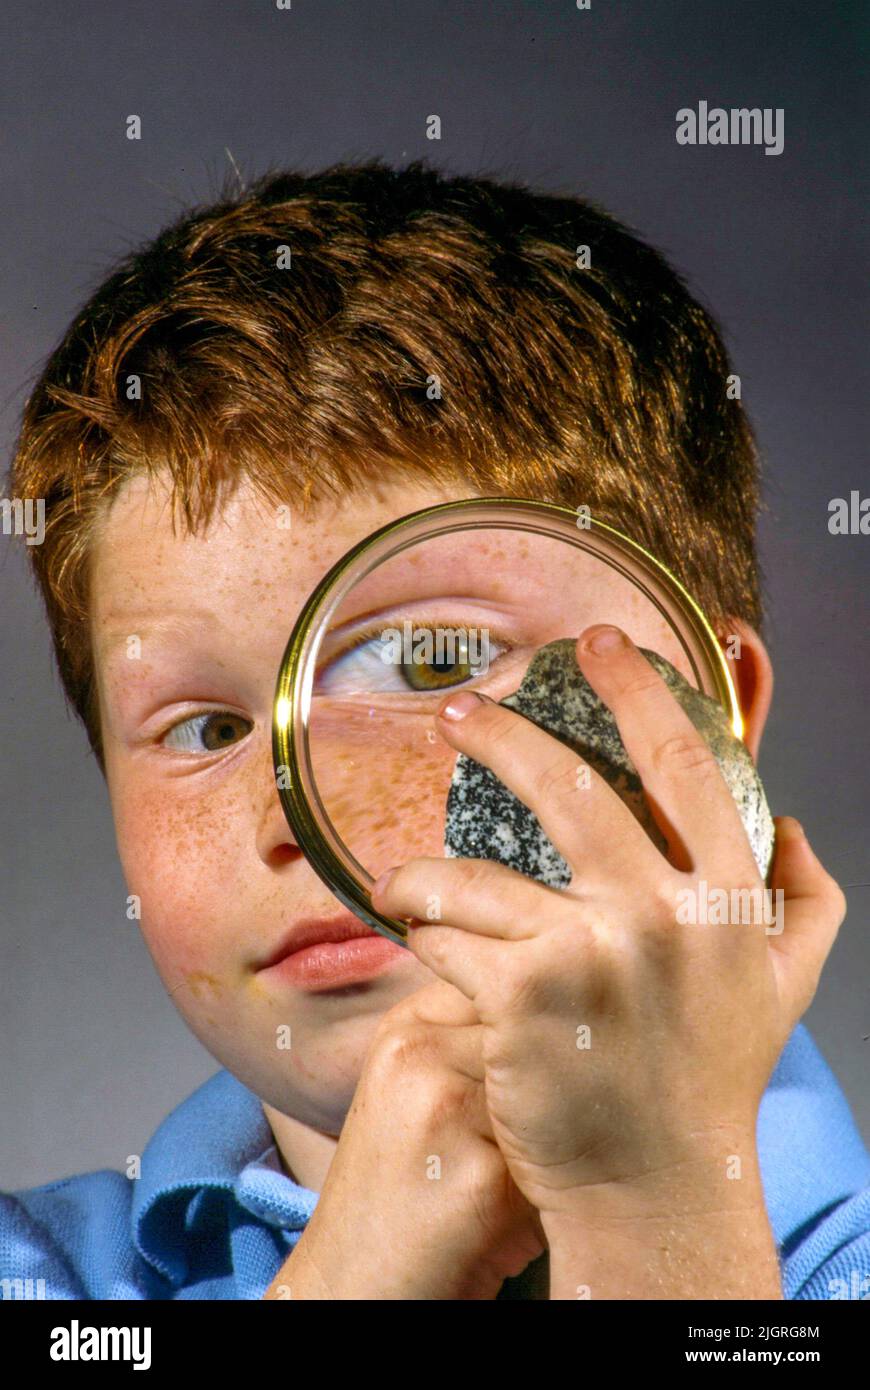 His eye enlarged by a magnifying glass, a red headed boy examines a geological sample stone. Stock Photo